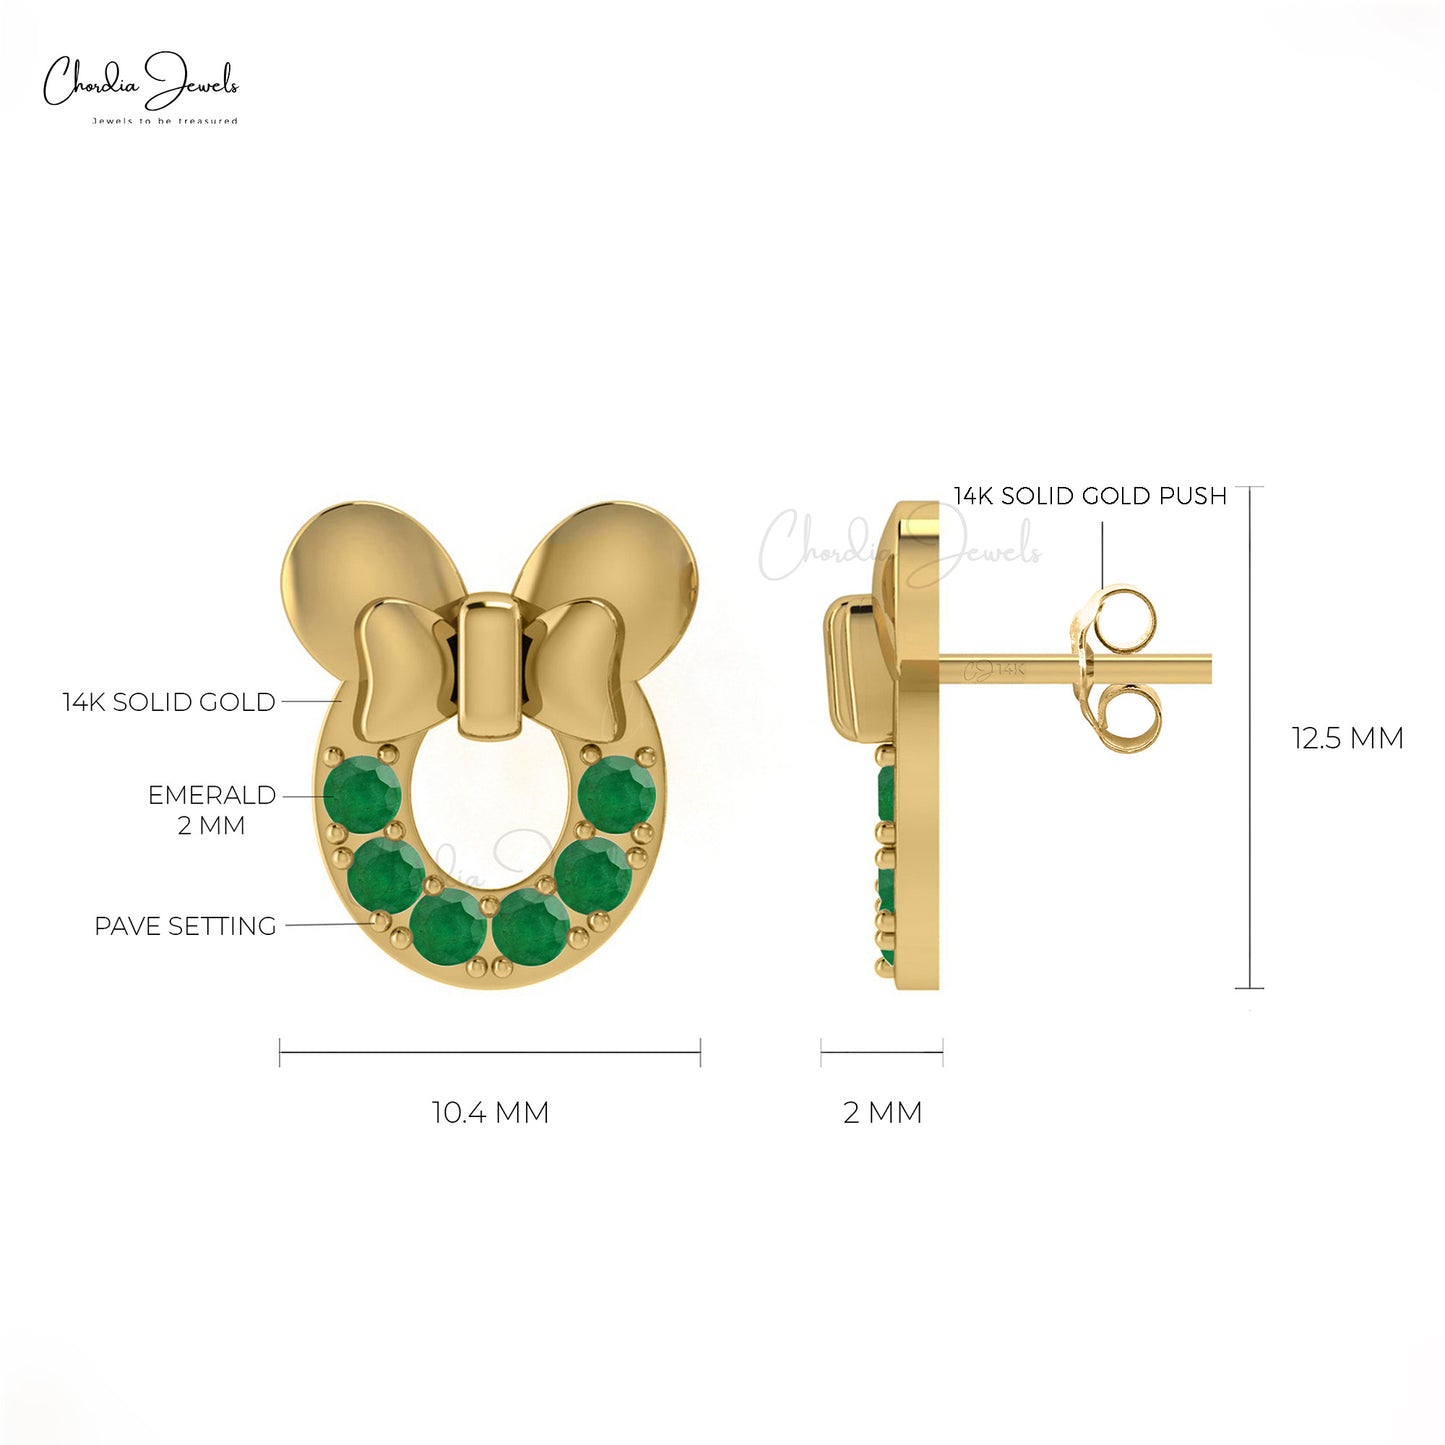 Load image into Gallery viewer, Natural Emerald 14k Real Gold 2mm Round Cut Gemstone May Birthstone Earrings Mickey Mouse Inspired Grace Jewelry For Wedding Gift
